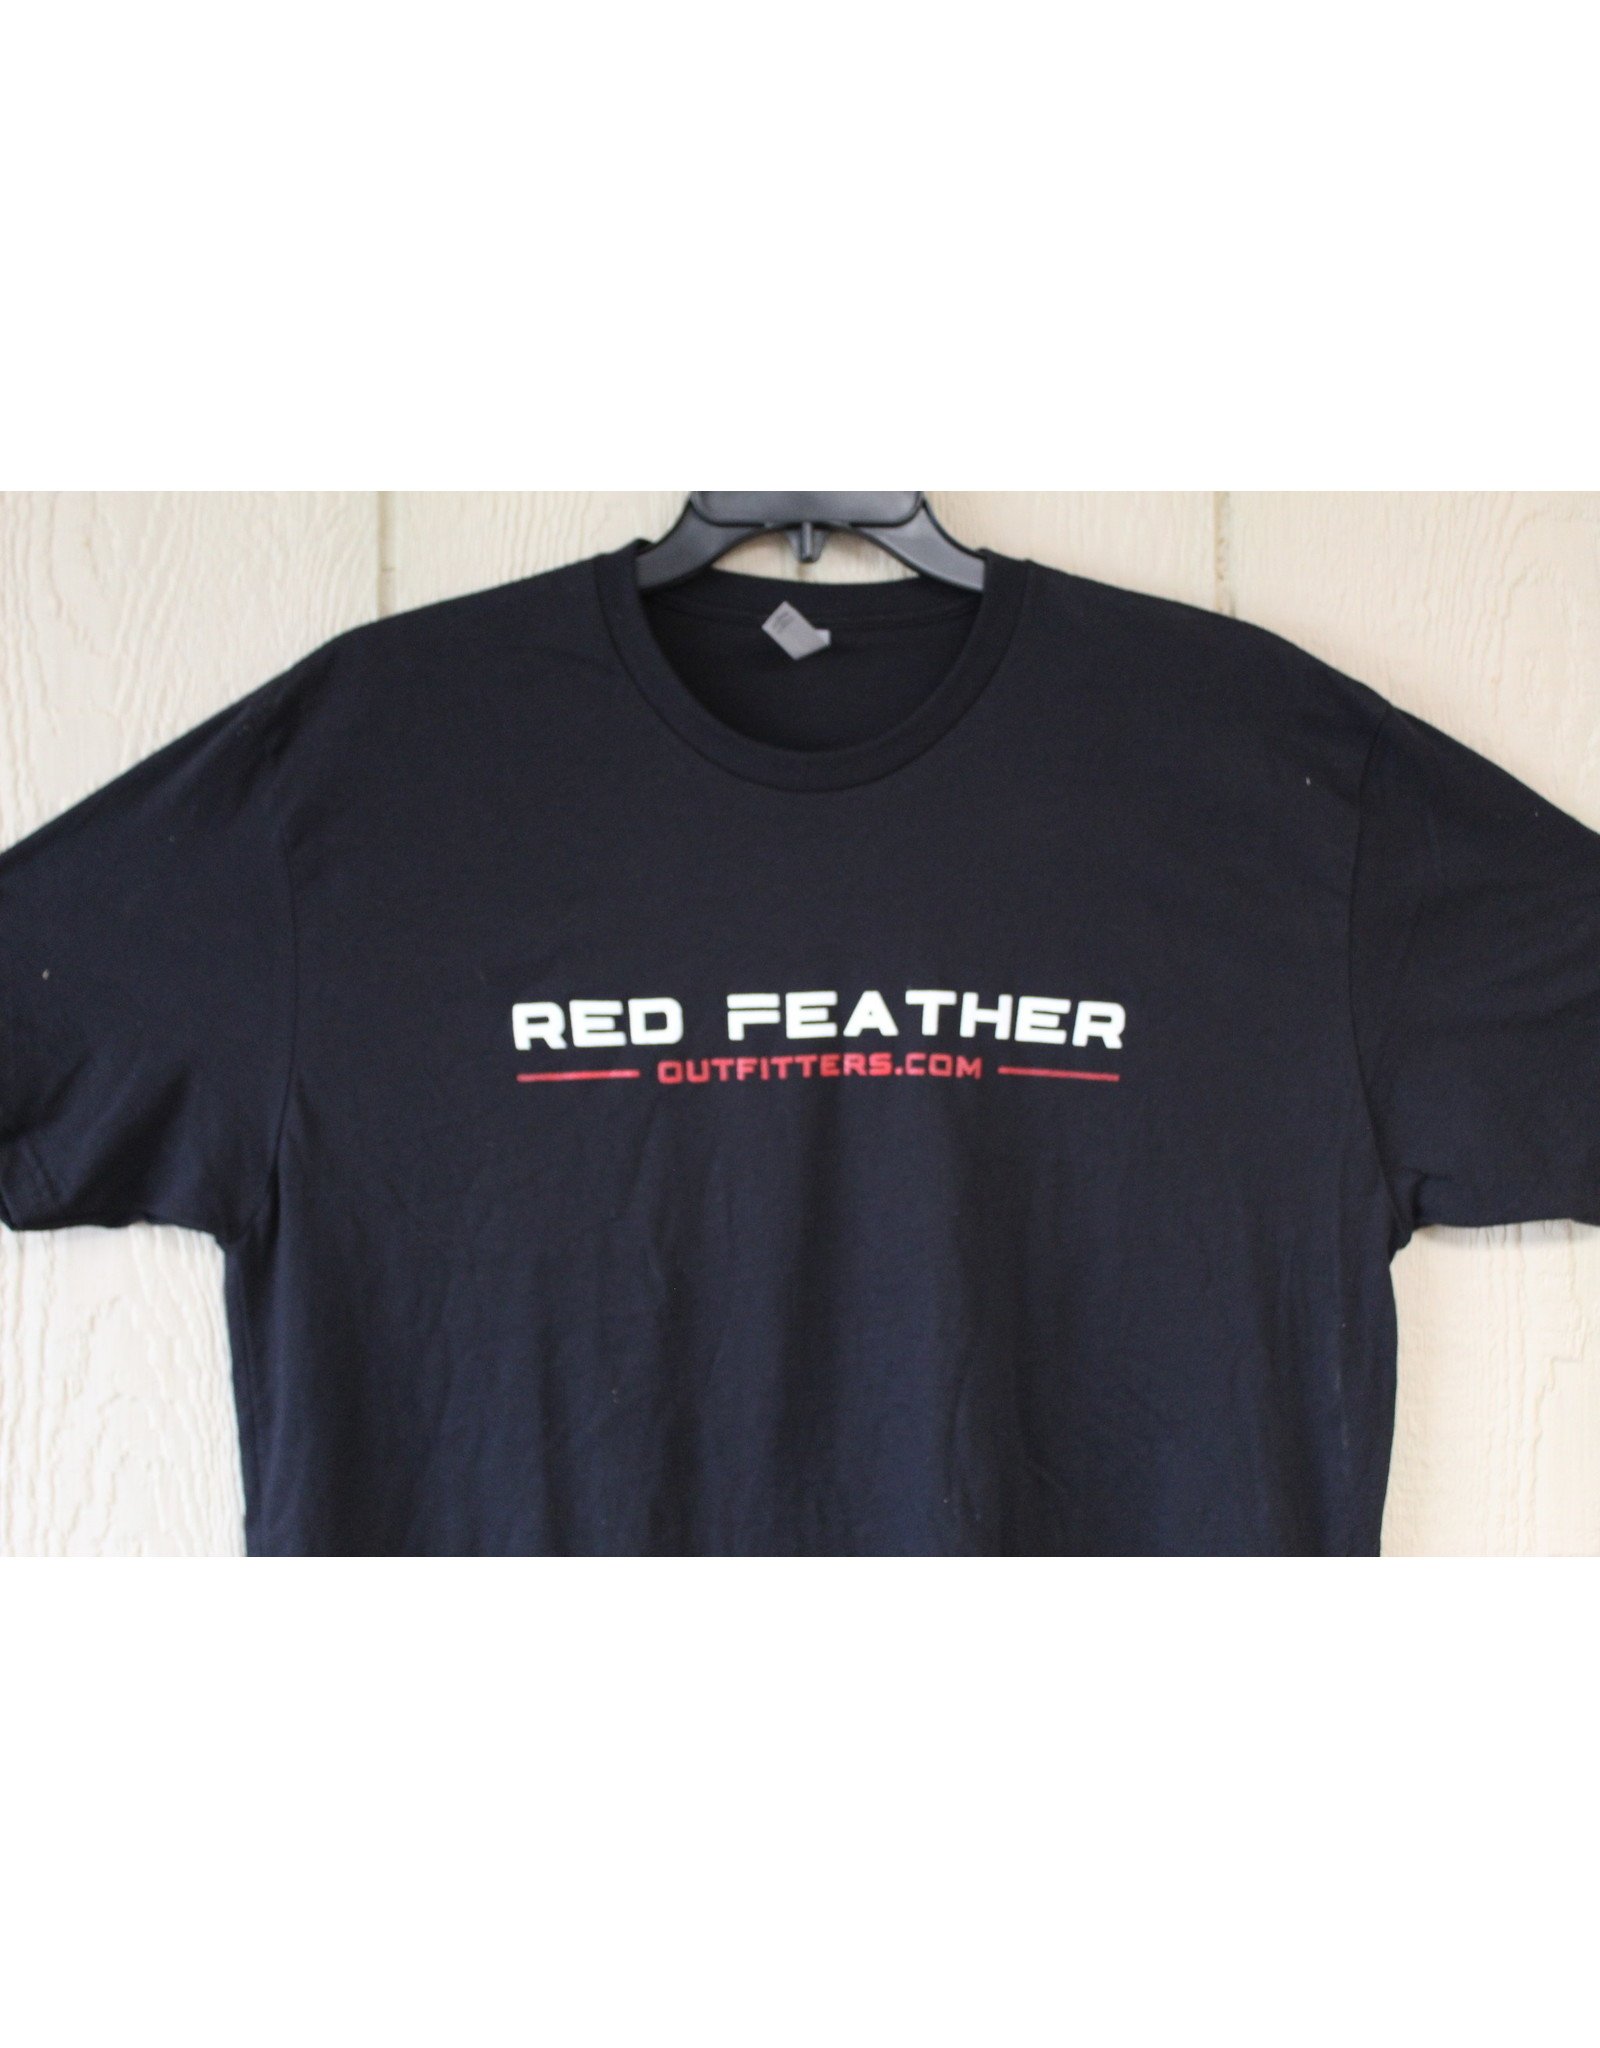 Red Feather Outfitters - Black Performance Shirt